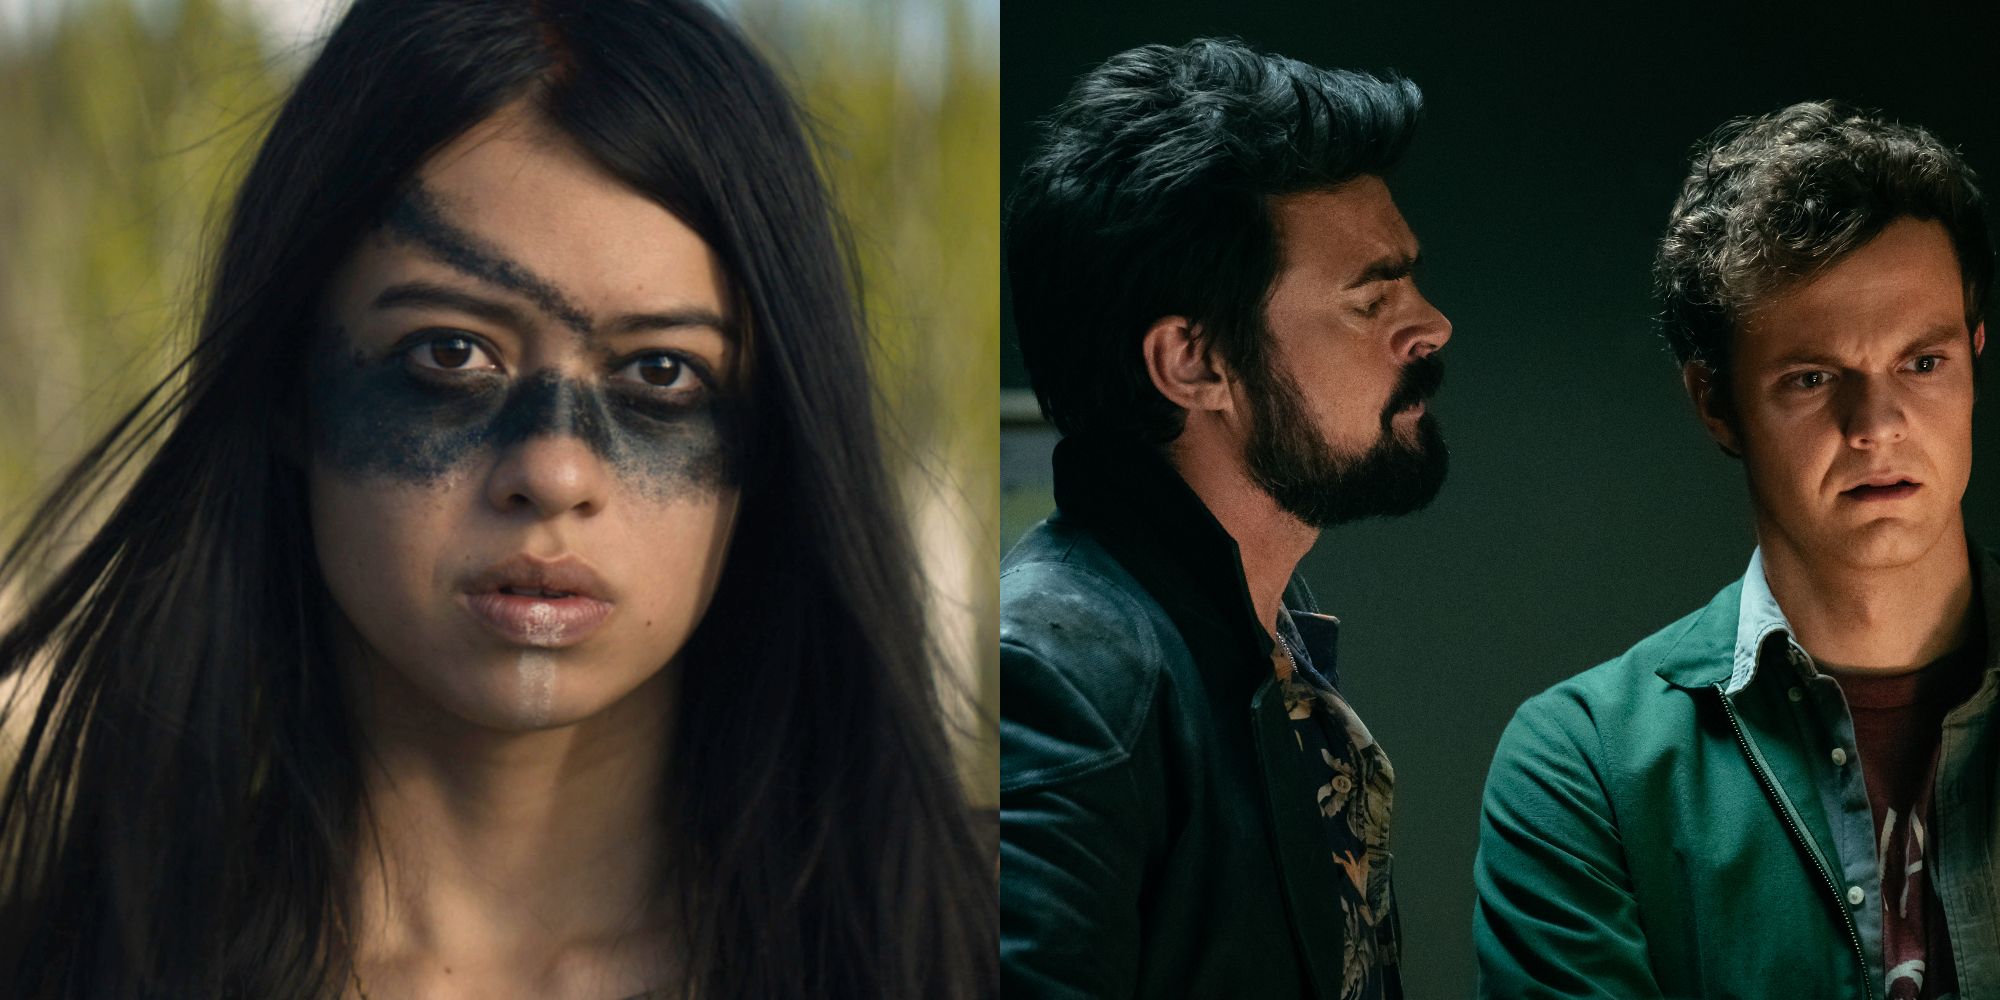 Split image showing characters from the film Prey and the show The Boys.